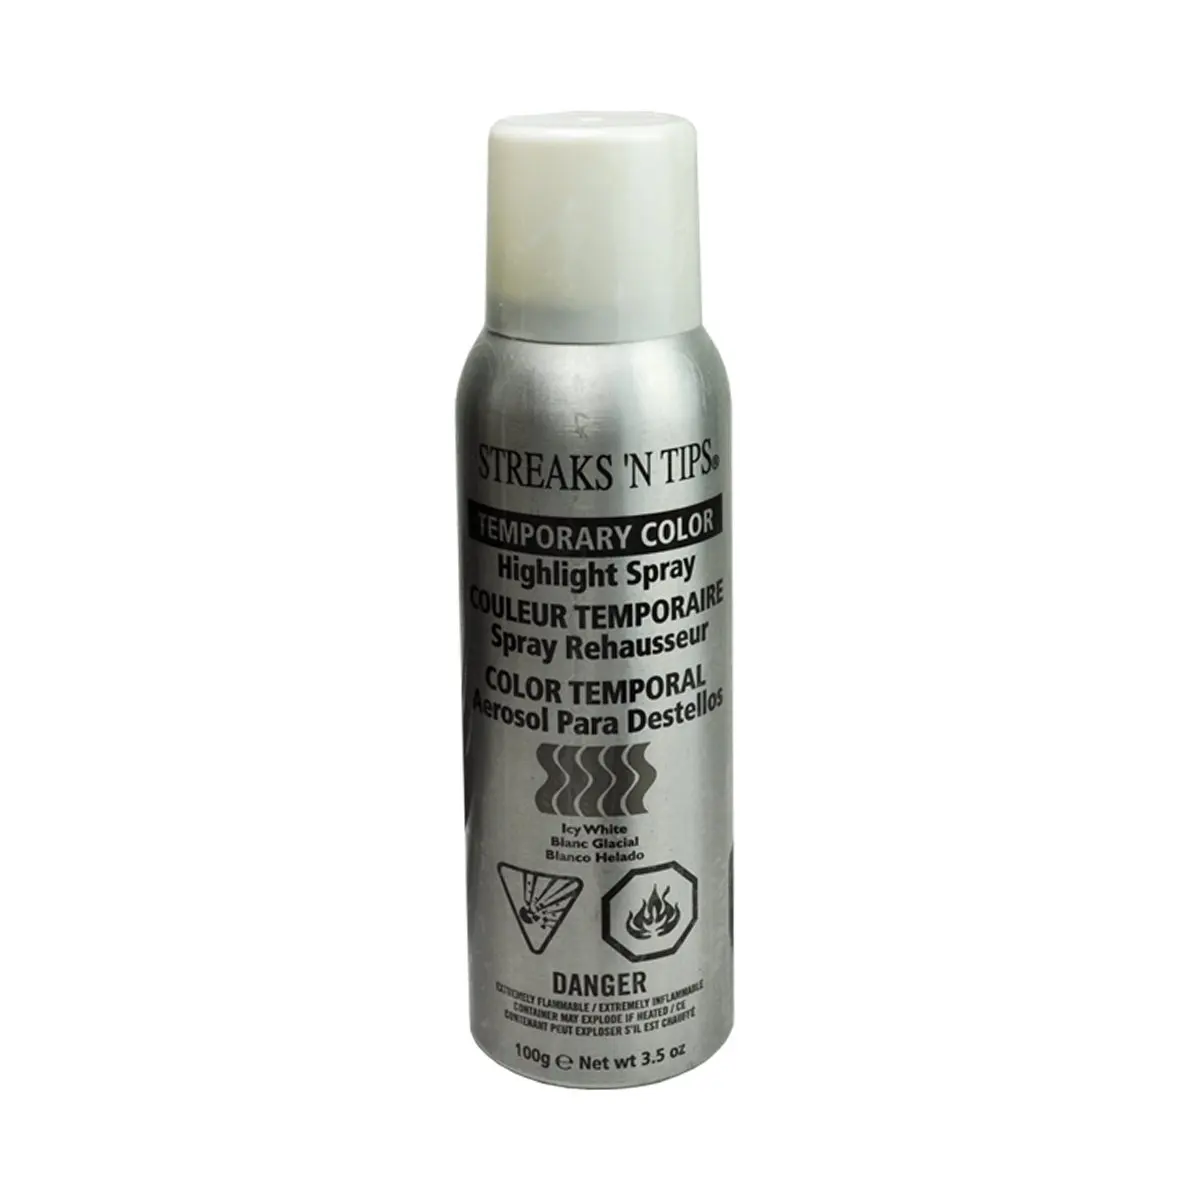 Icy White Temporary Color Highlight Spray 3.5oz (PACK OF 2). 11.03. 